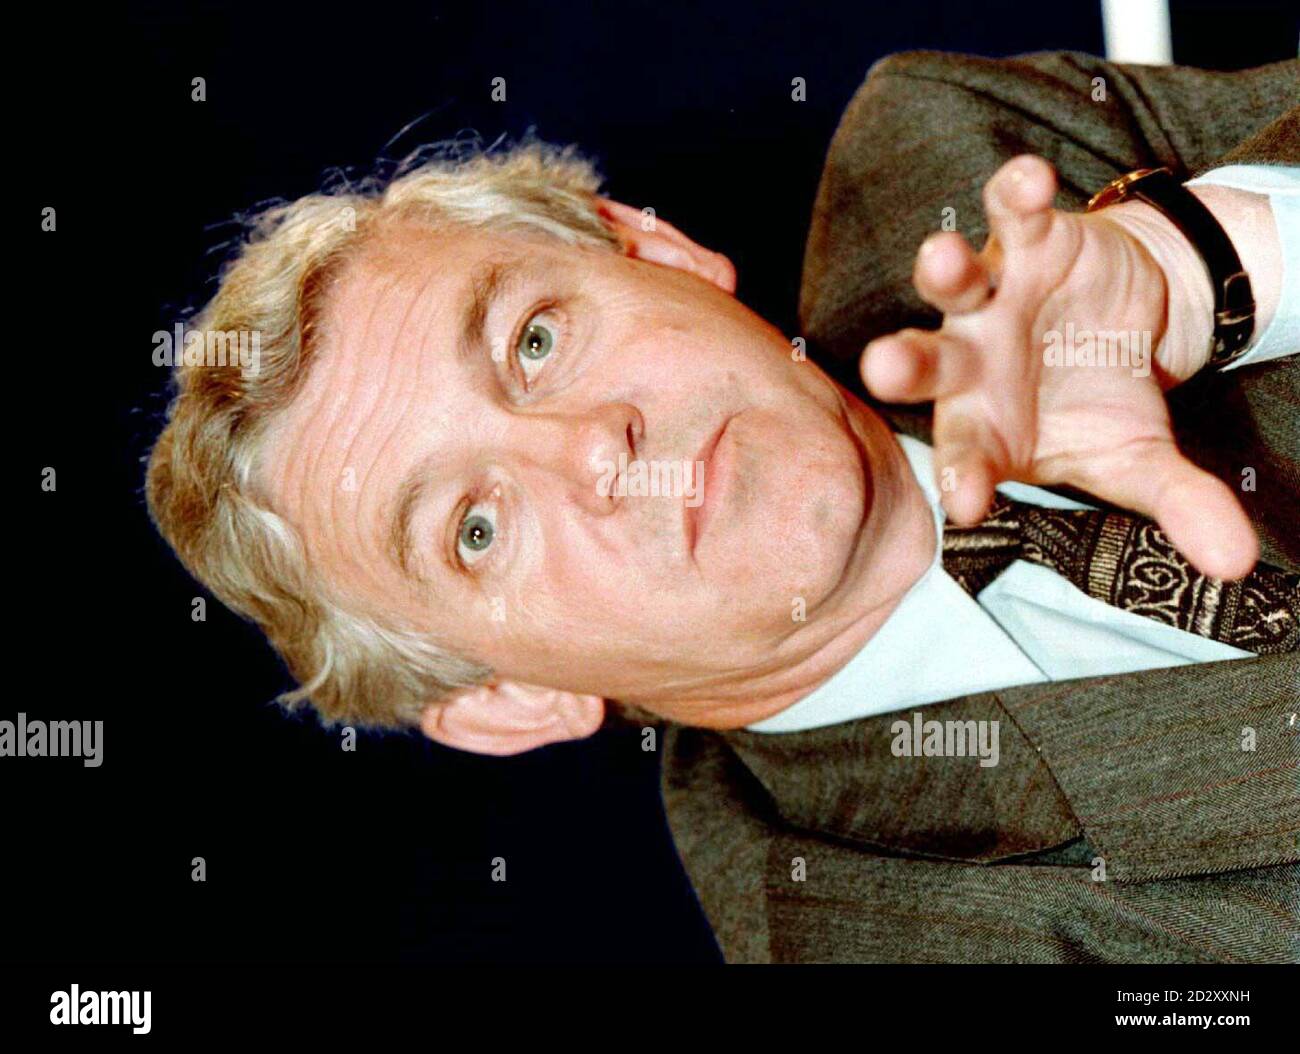 RICHARD TILT DIRECTOR-GENERAL OF THE PRISON SERVICE ANSWERS QUESTIONS AT A PRESS CONFERENCE AT H.M. PRISON WHITEMOOR YESTERDAY (WEDNESDAY) 18 JUNE 1997 ON A REPORT PUBLISHED BY THE INDEPENDENT PRISONS INSPECTORATE. Photo by Findlay Kember. Stock Photo